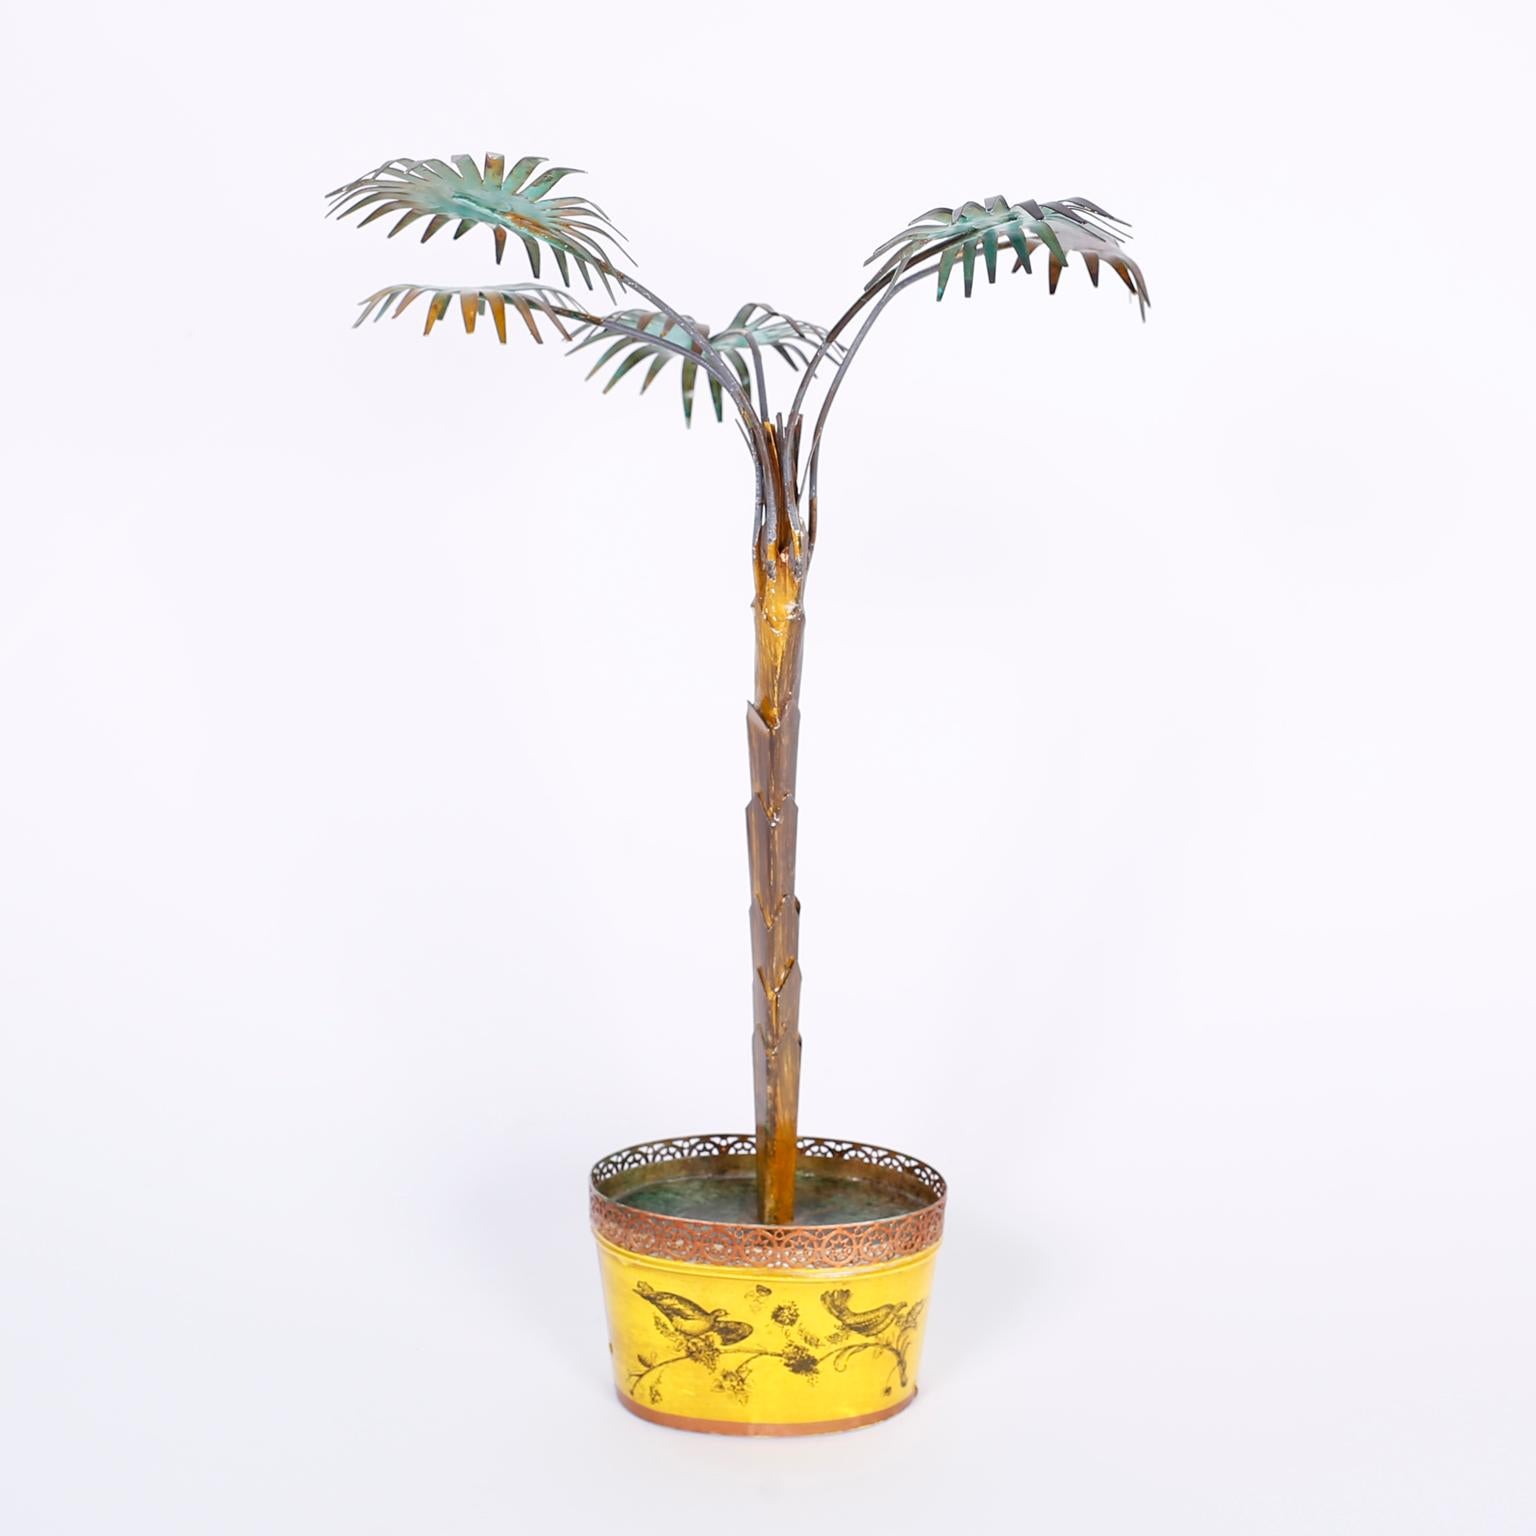 Stylized Italian palm tree with a rustic patina set in a classic yellow tole planter decorated with birds and flowers.